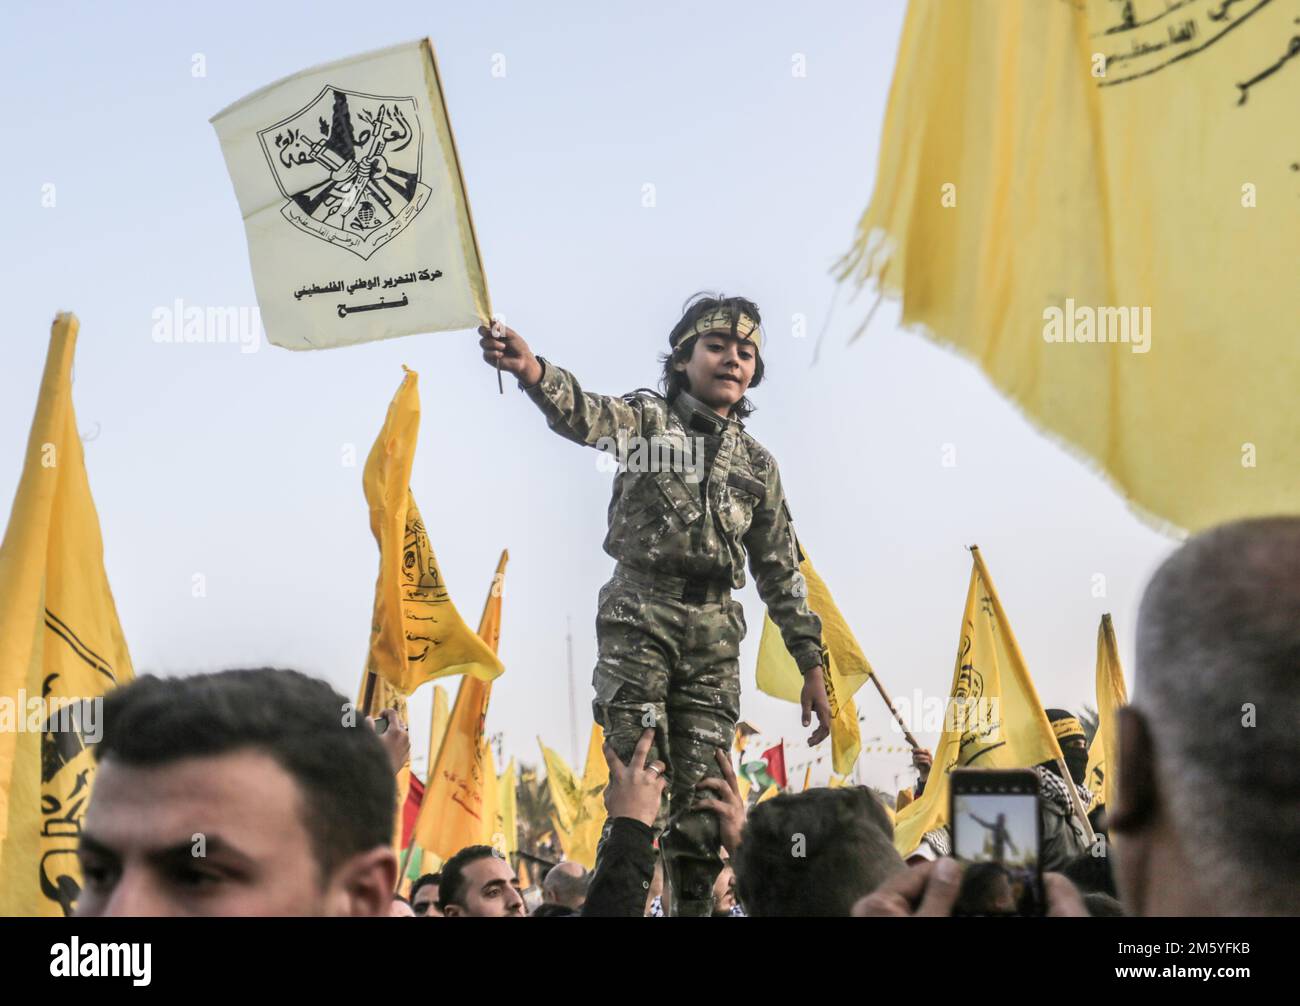 A Palestinian child wears a keffiyeh seen waving a flag during the rally to commemorate the 58th anniversary of the founding of the Fatah movement in Gaza City. (Photo by Mahmoud Issa / SOPA Images/Sipa USA) Stock Photo